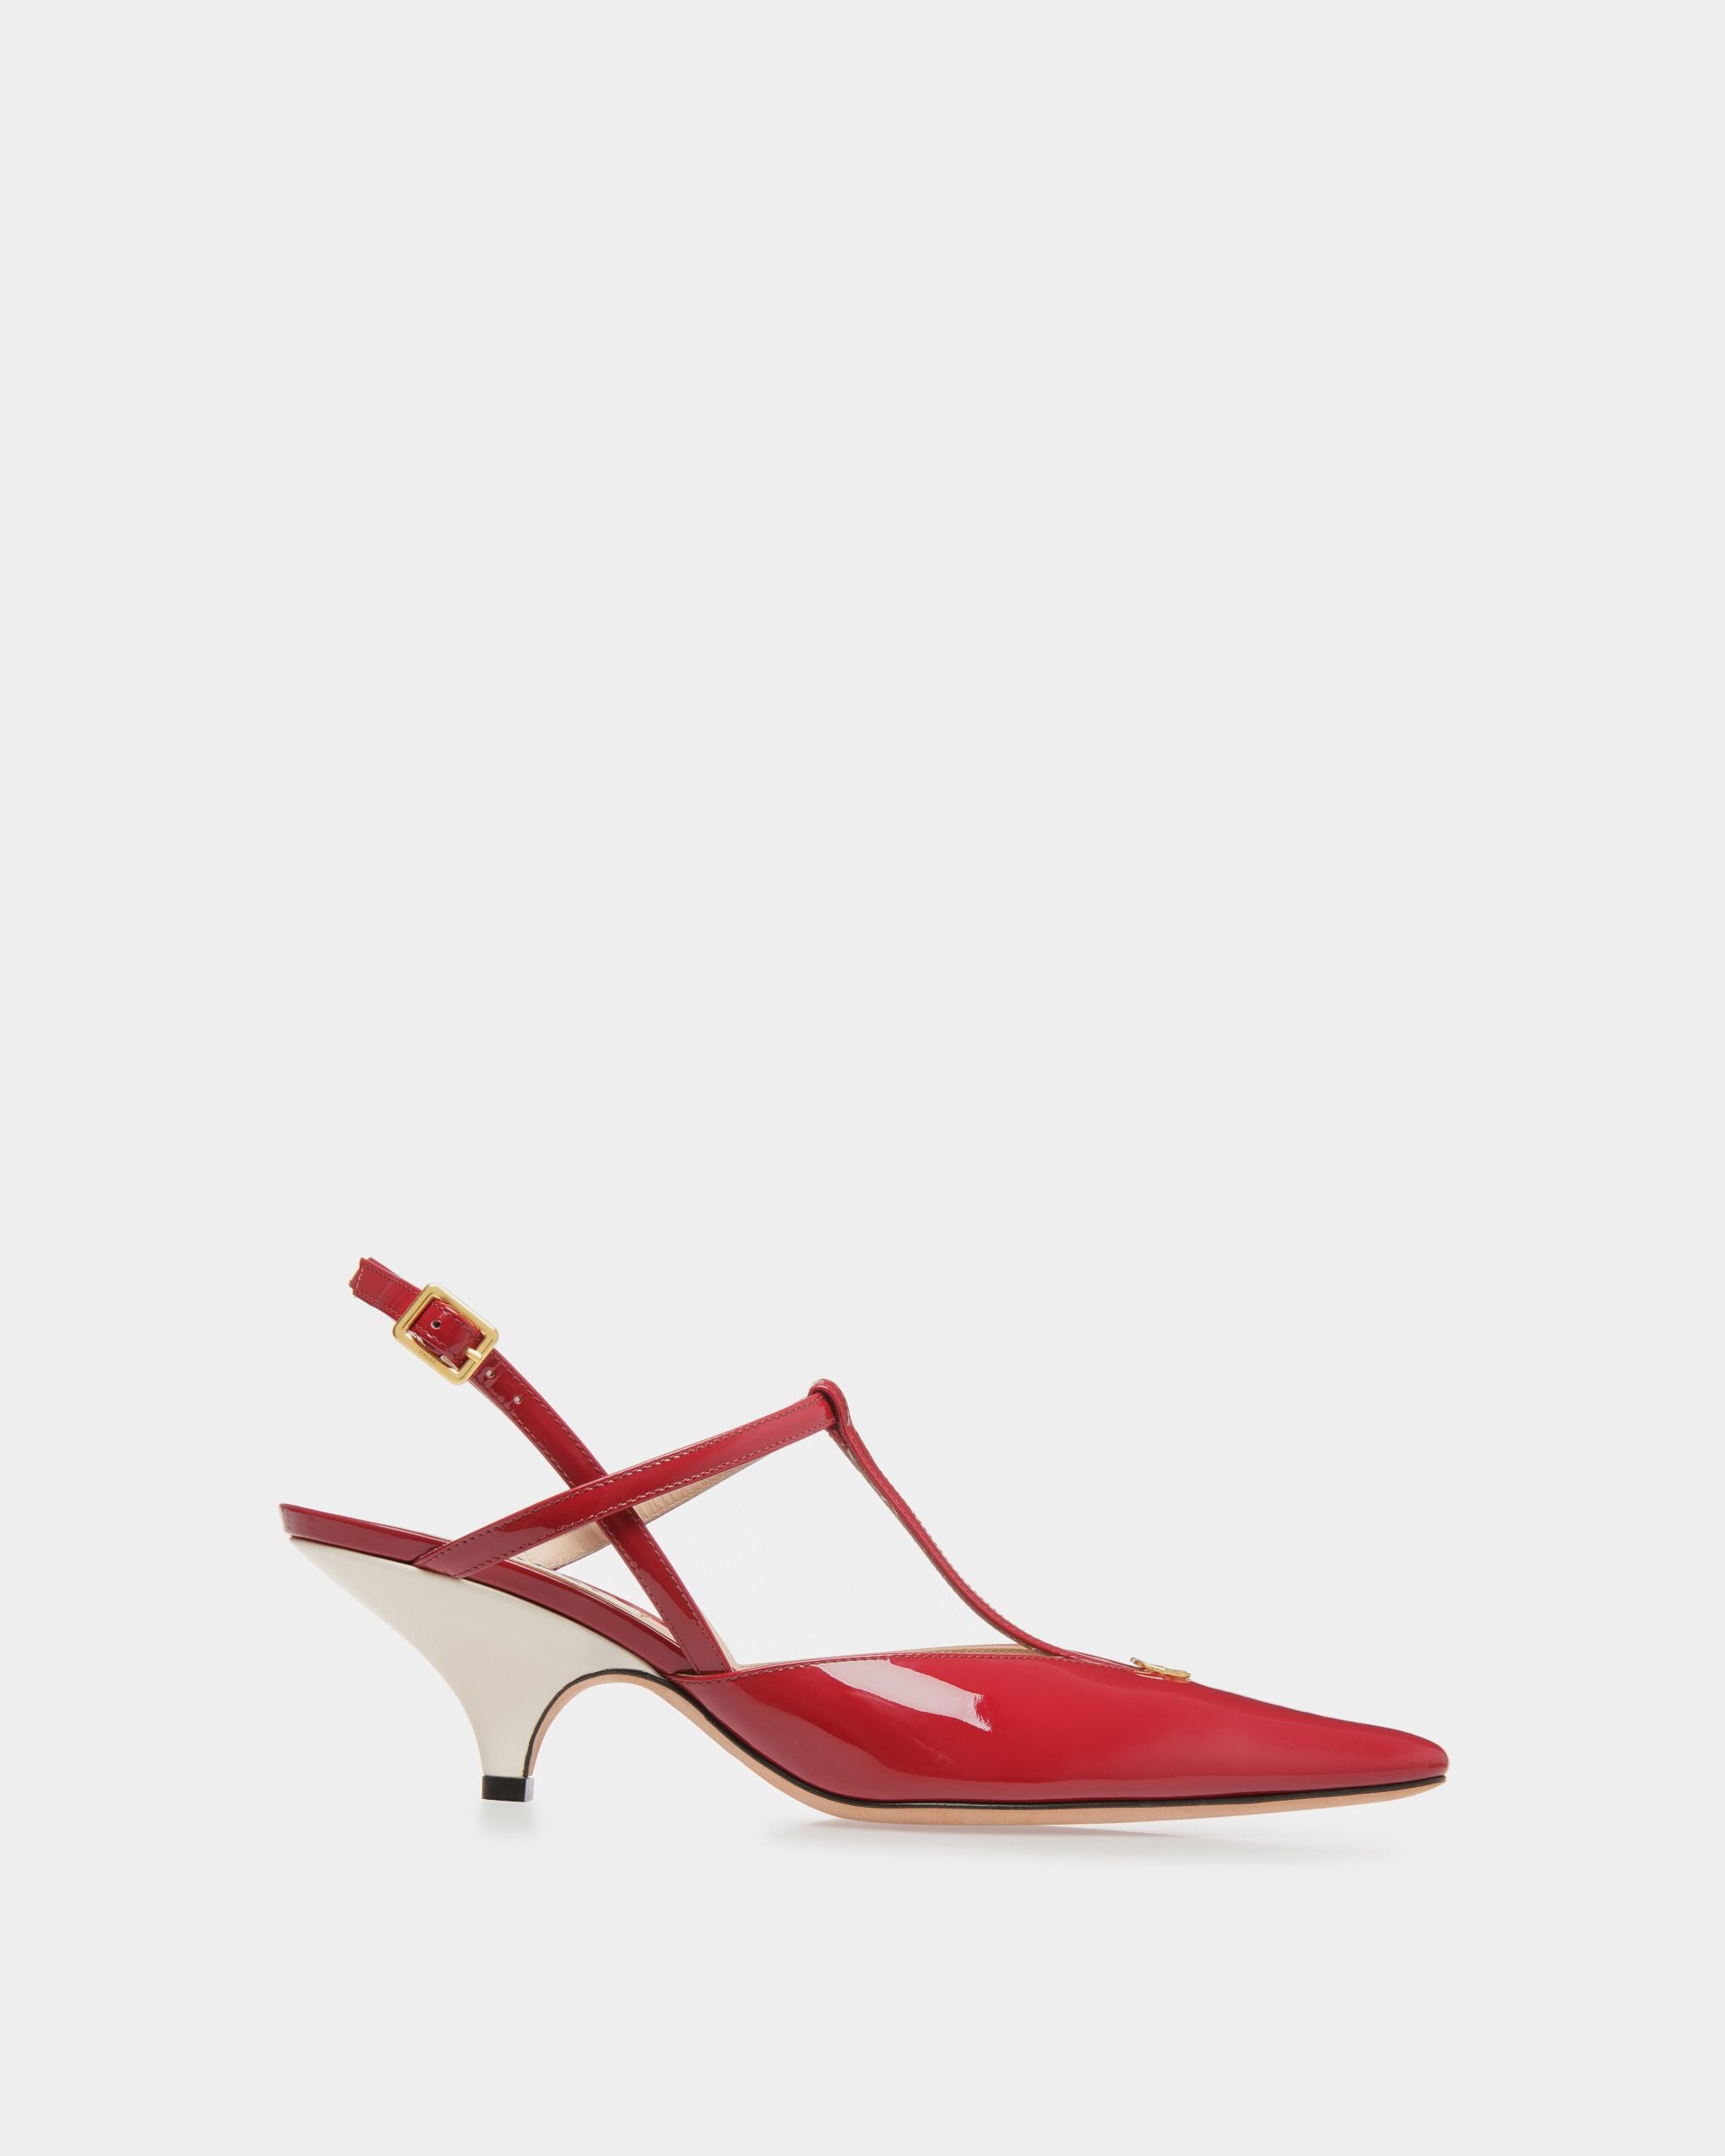 Karline | Women's Pumps | Ruby Red And Bone Leather | Bally | Still Life Side